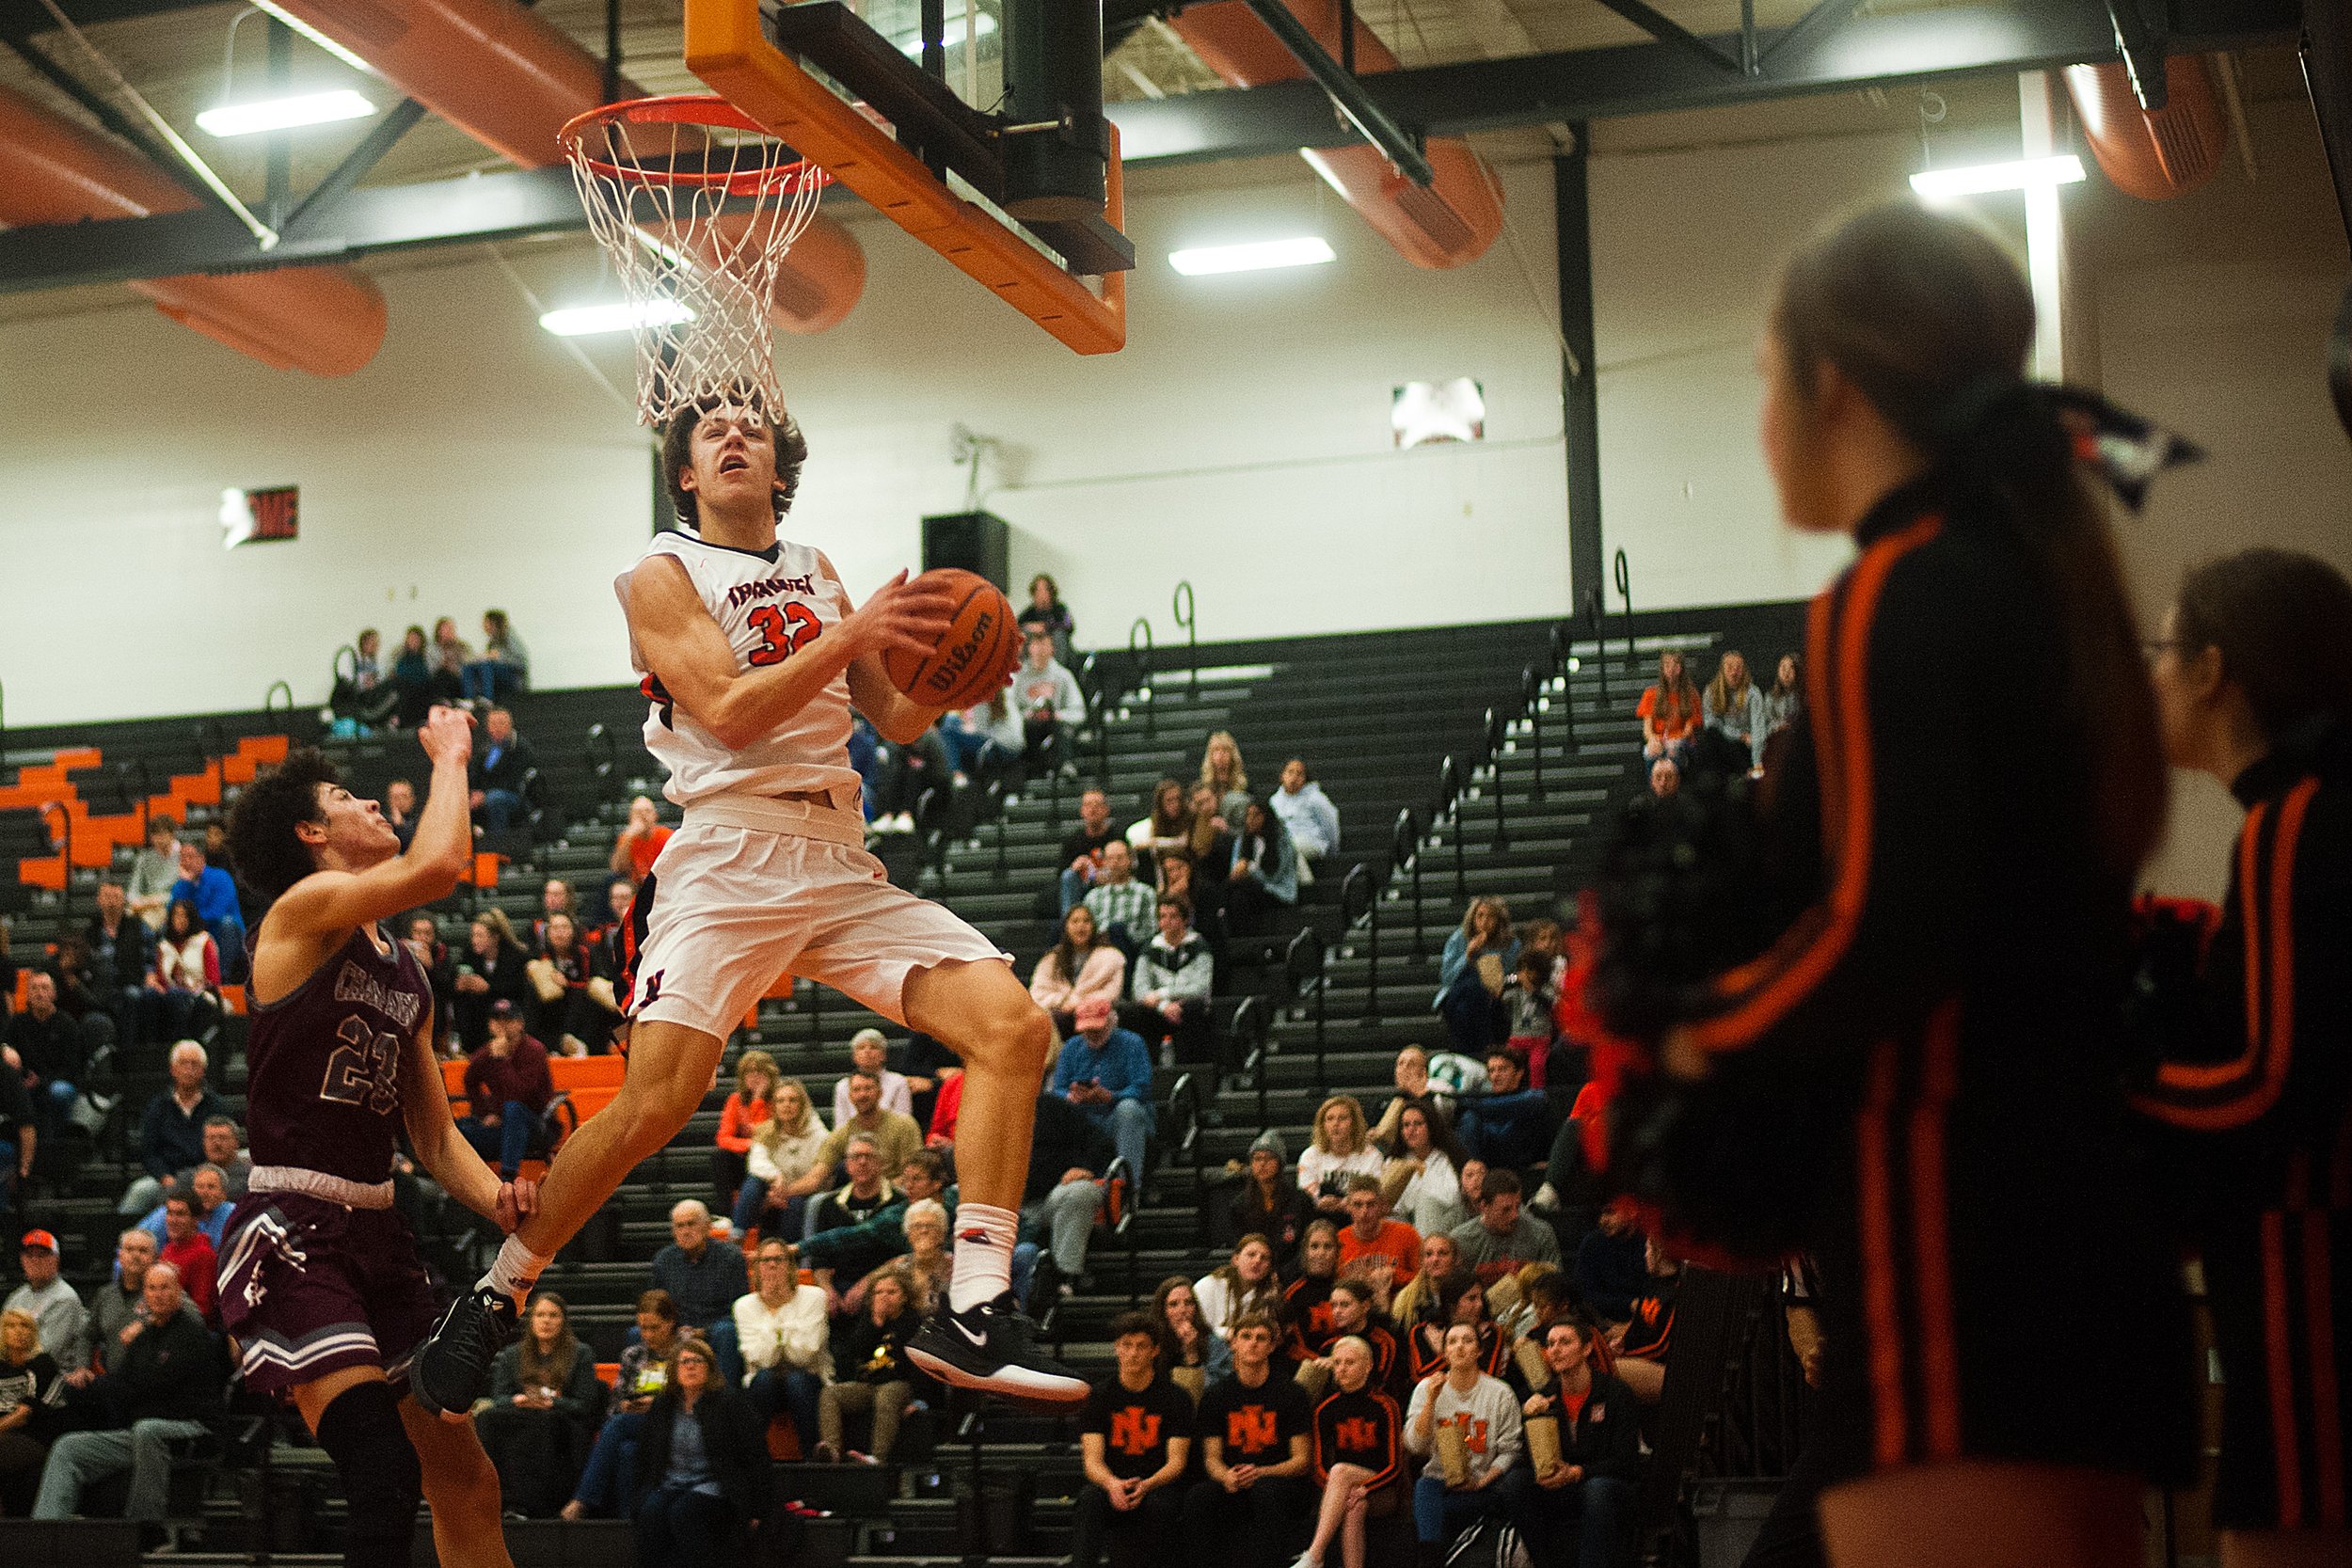  Normal Community High School’s Zach Cleveland goes coast-to-coast on a layup during a boys basketball game against Champaign Central High School on Friday, Dec. 13, 2019, in Normal, Illinois. NCHS won, 60-52. 